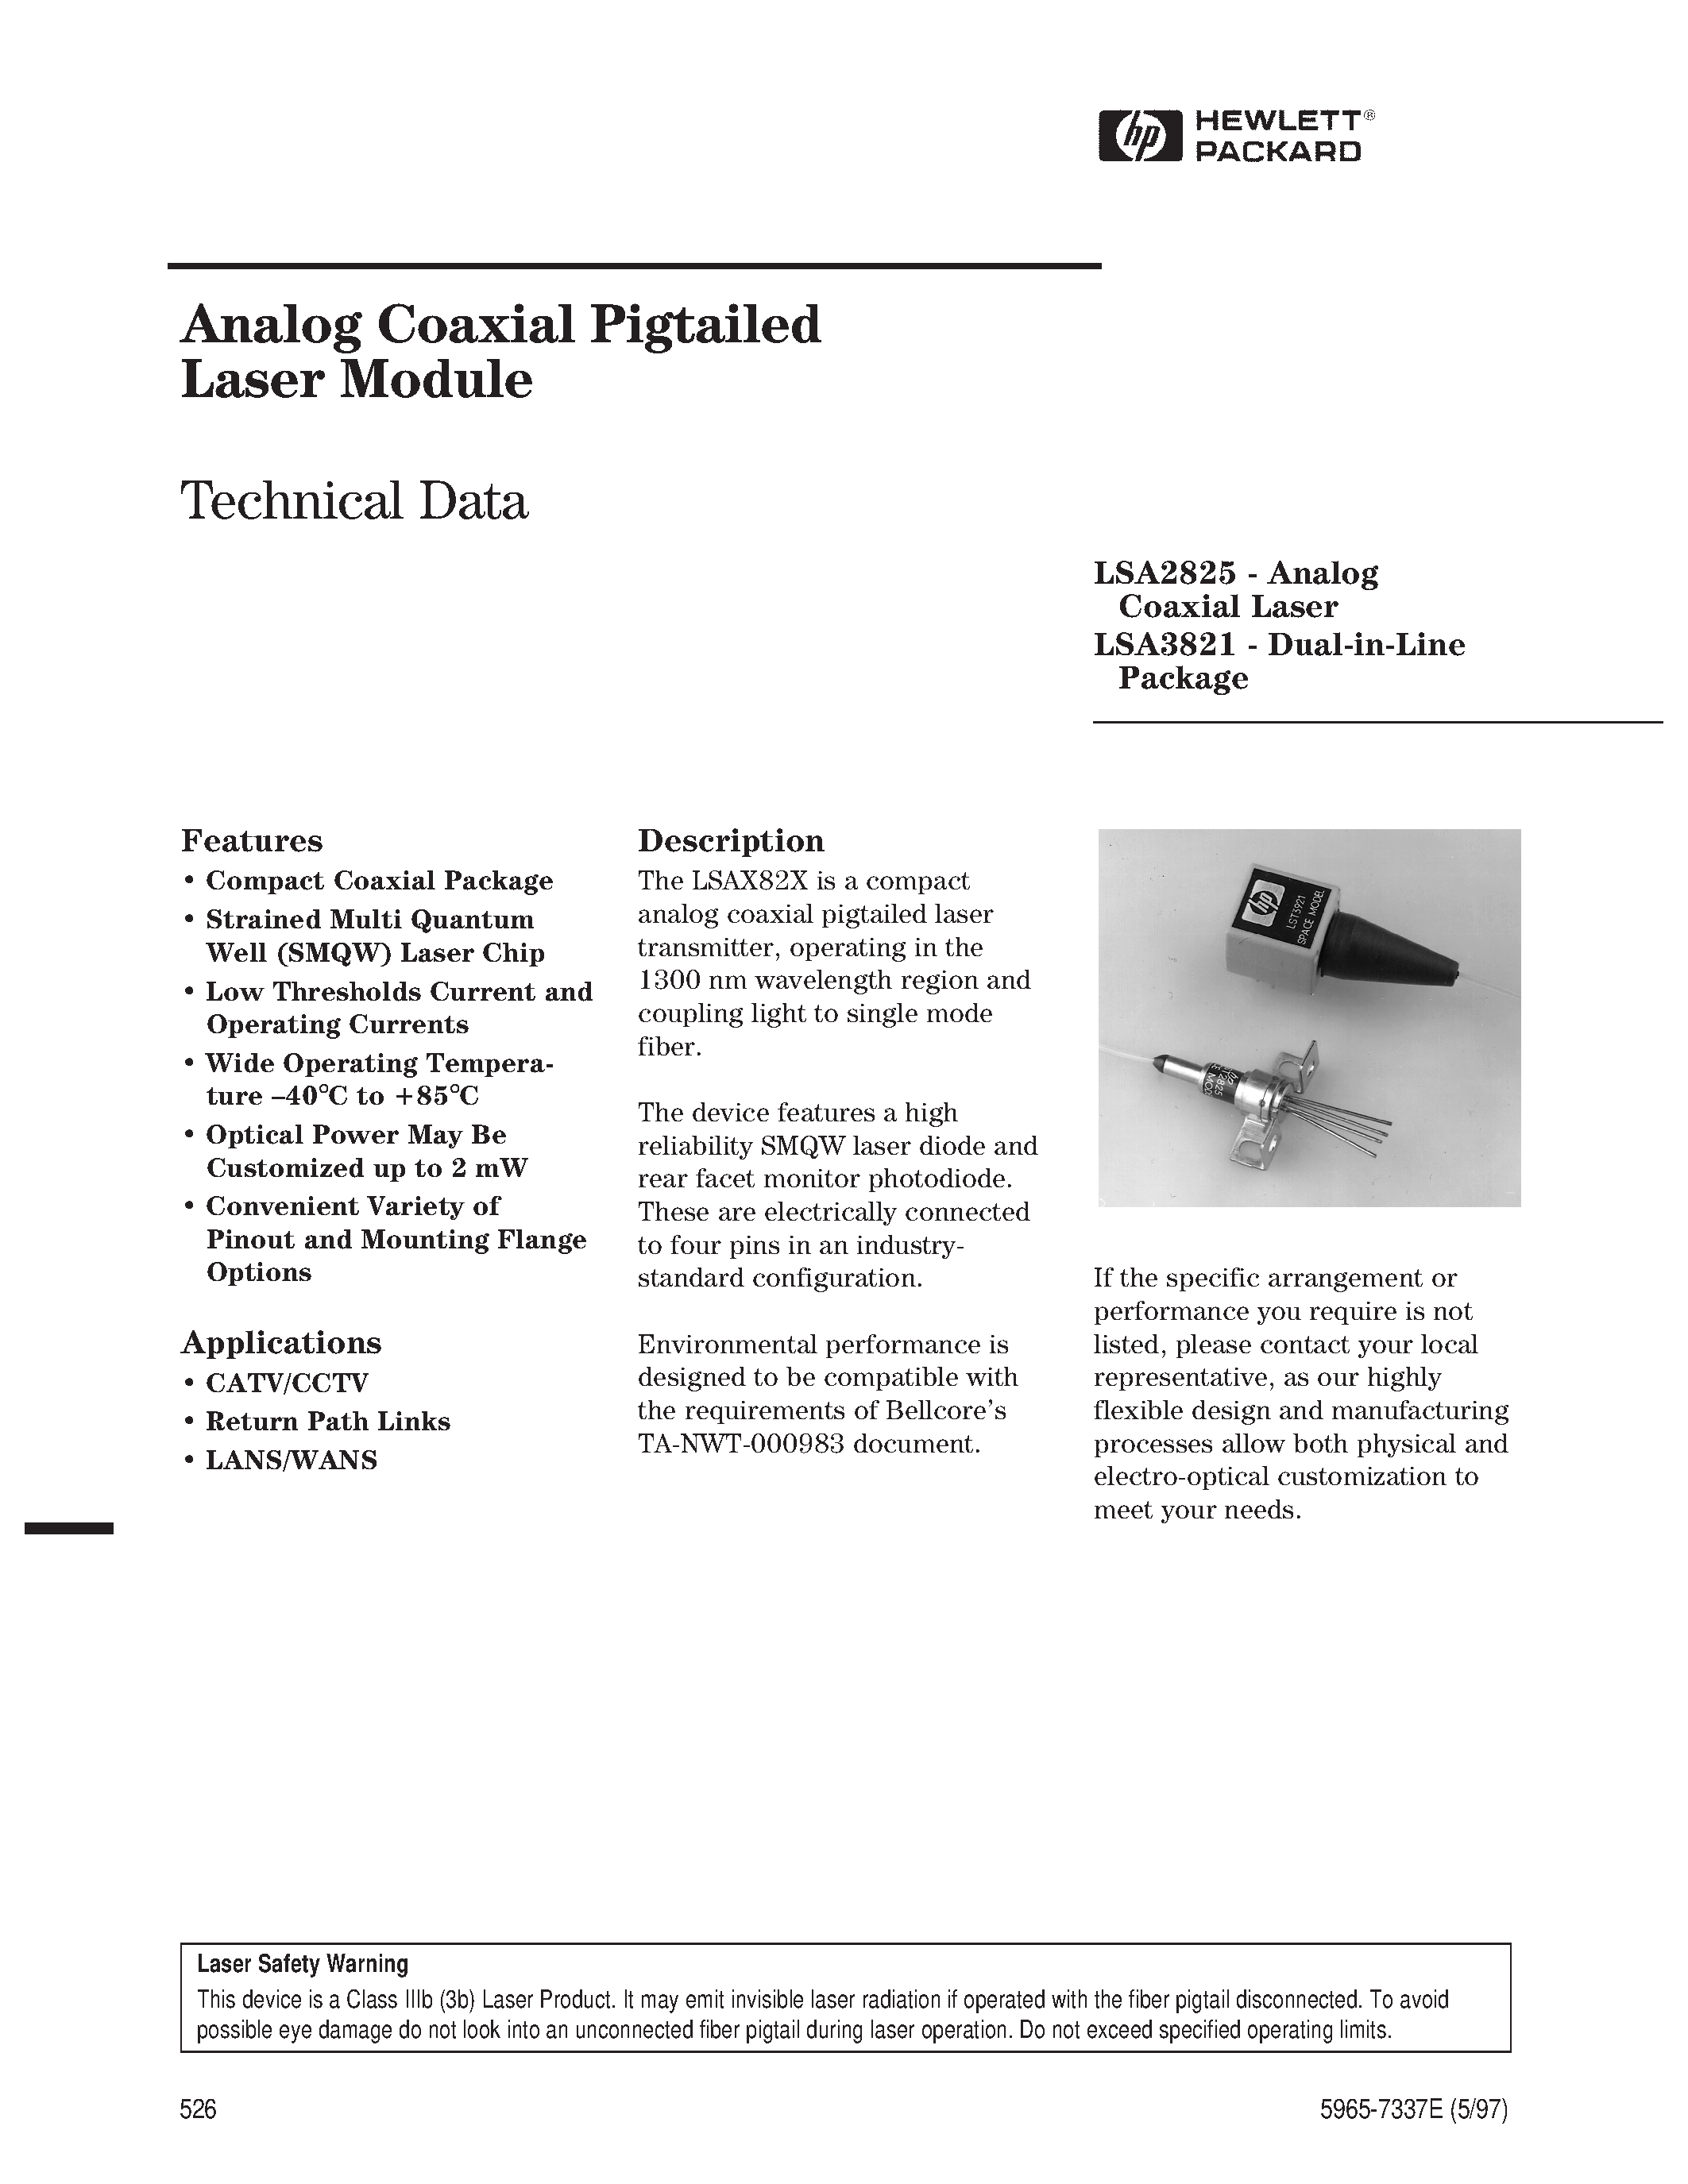 Datasheet LSA2825-T-SF - Analog Coaxial Pigtailed Laser Module page 1